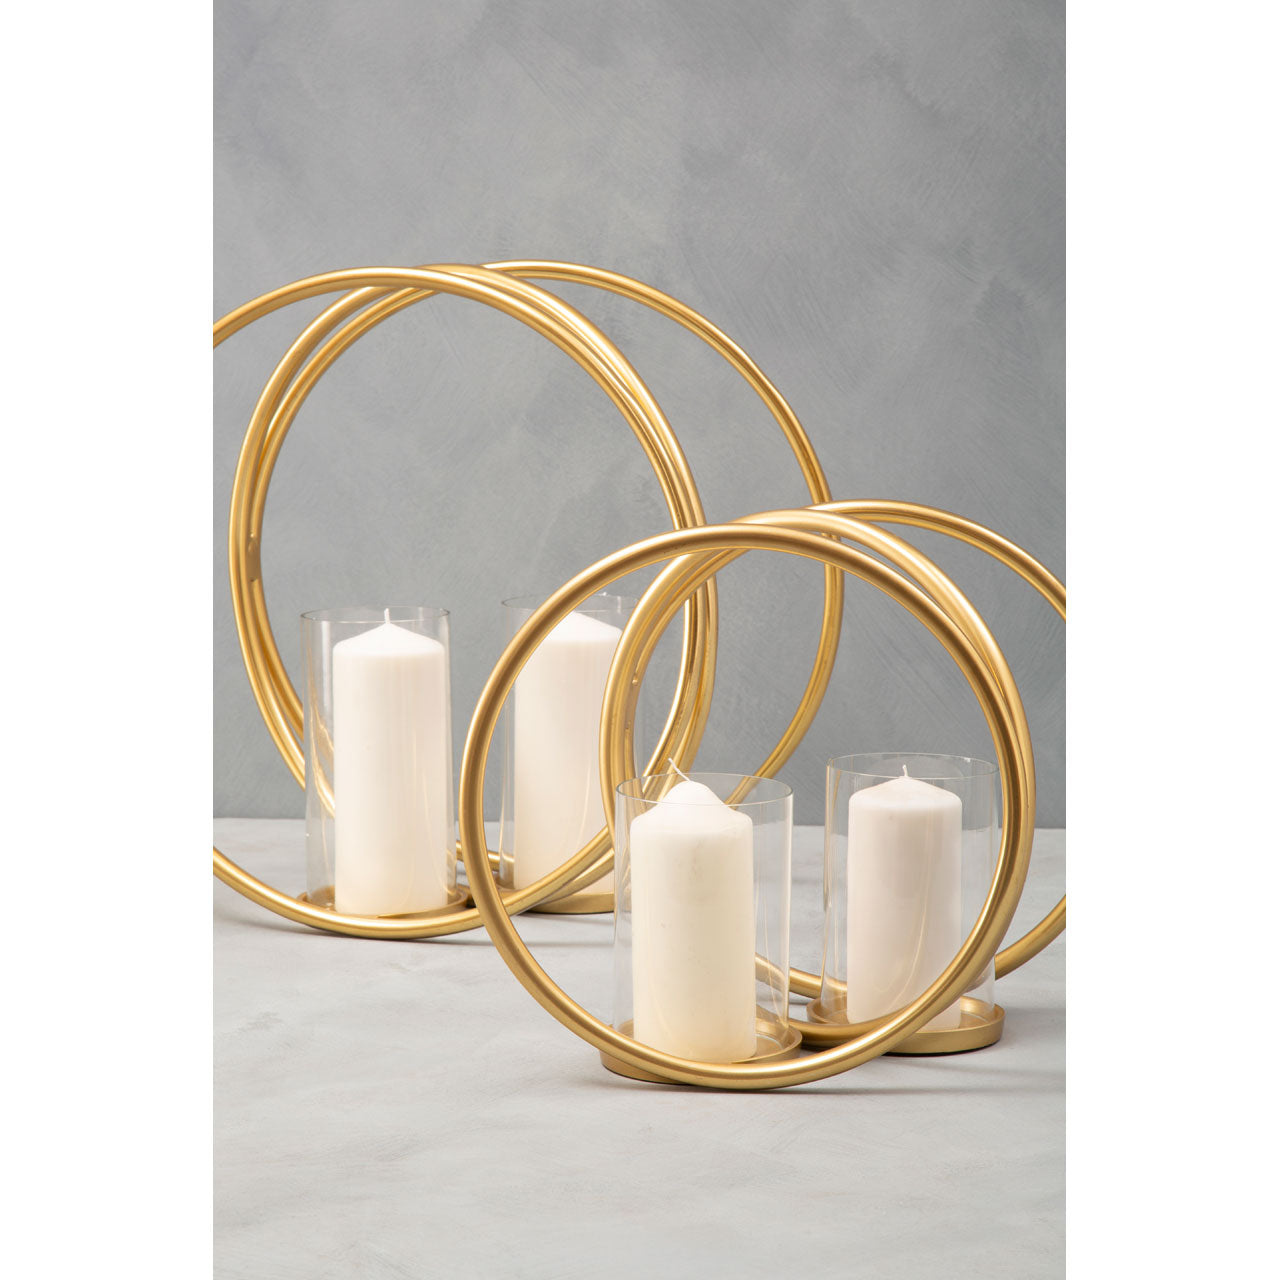 Olivia's Boutique Hotel Collection - Double Ring Gold Candle Holder